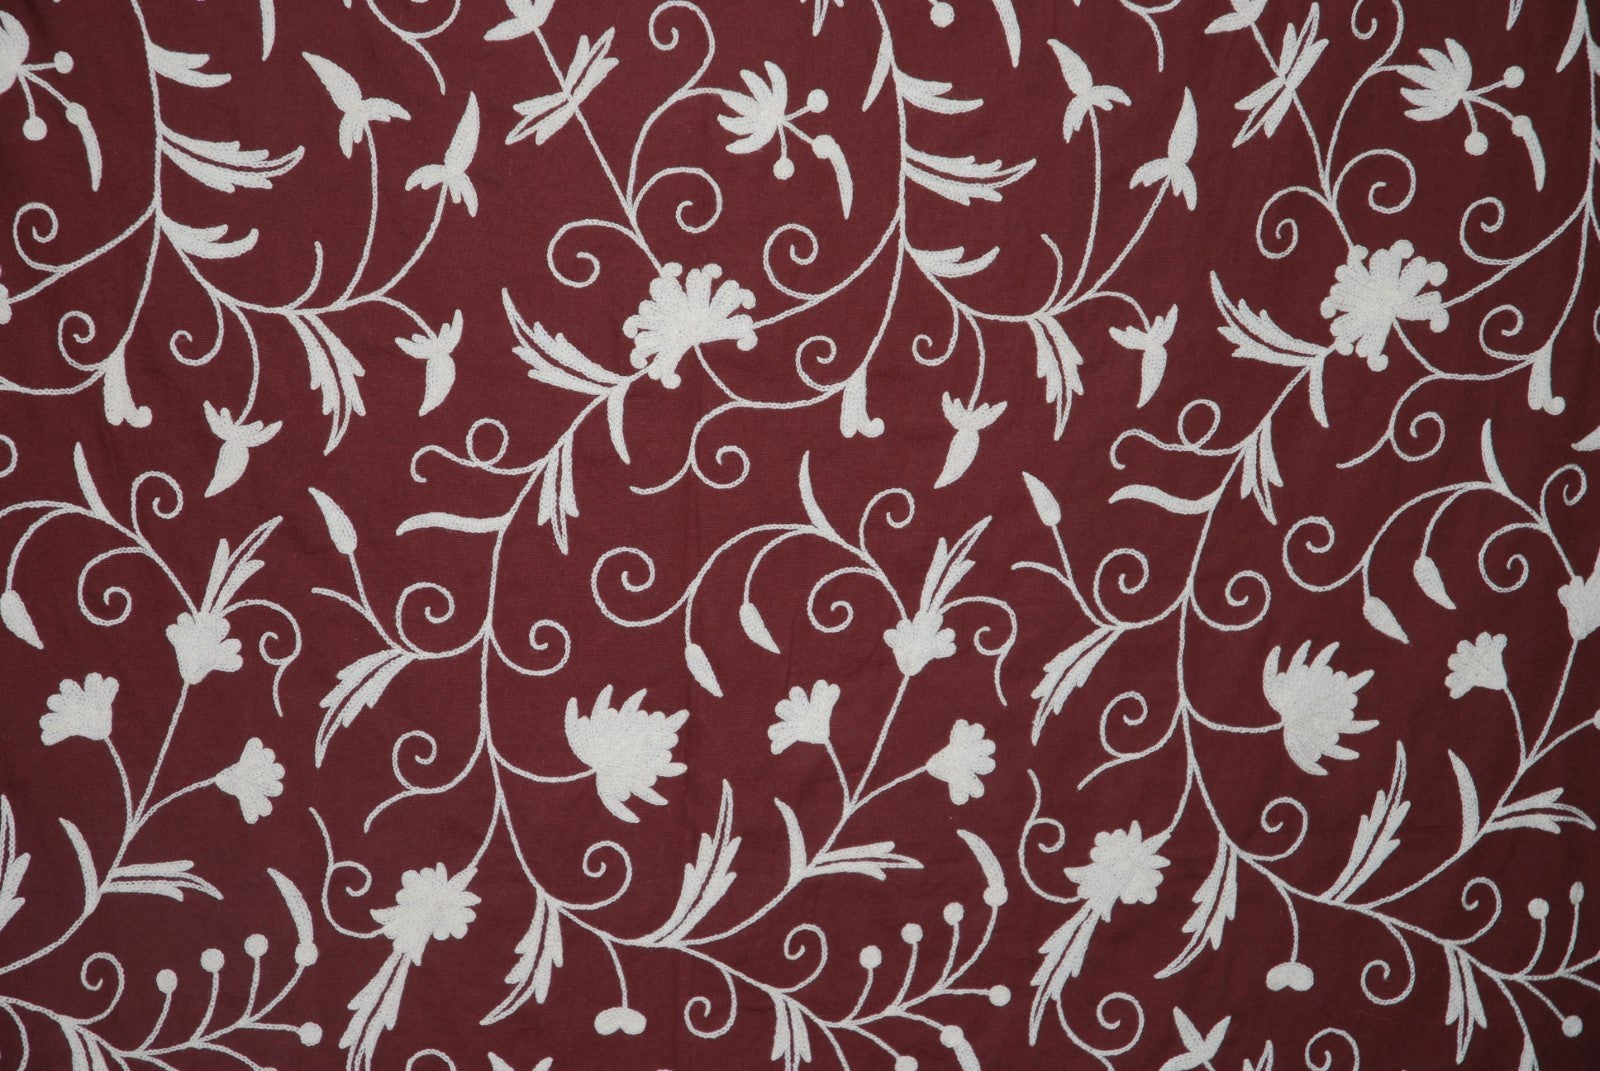 Cotton Crewel Embroidered Fabric Jacobean, White on Maroon #TML558